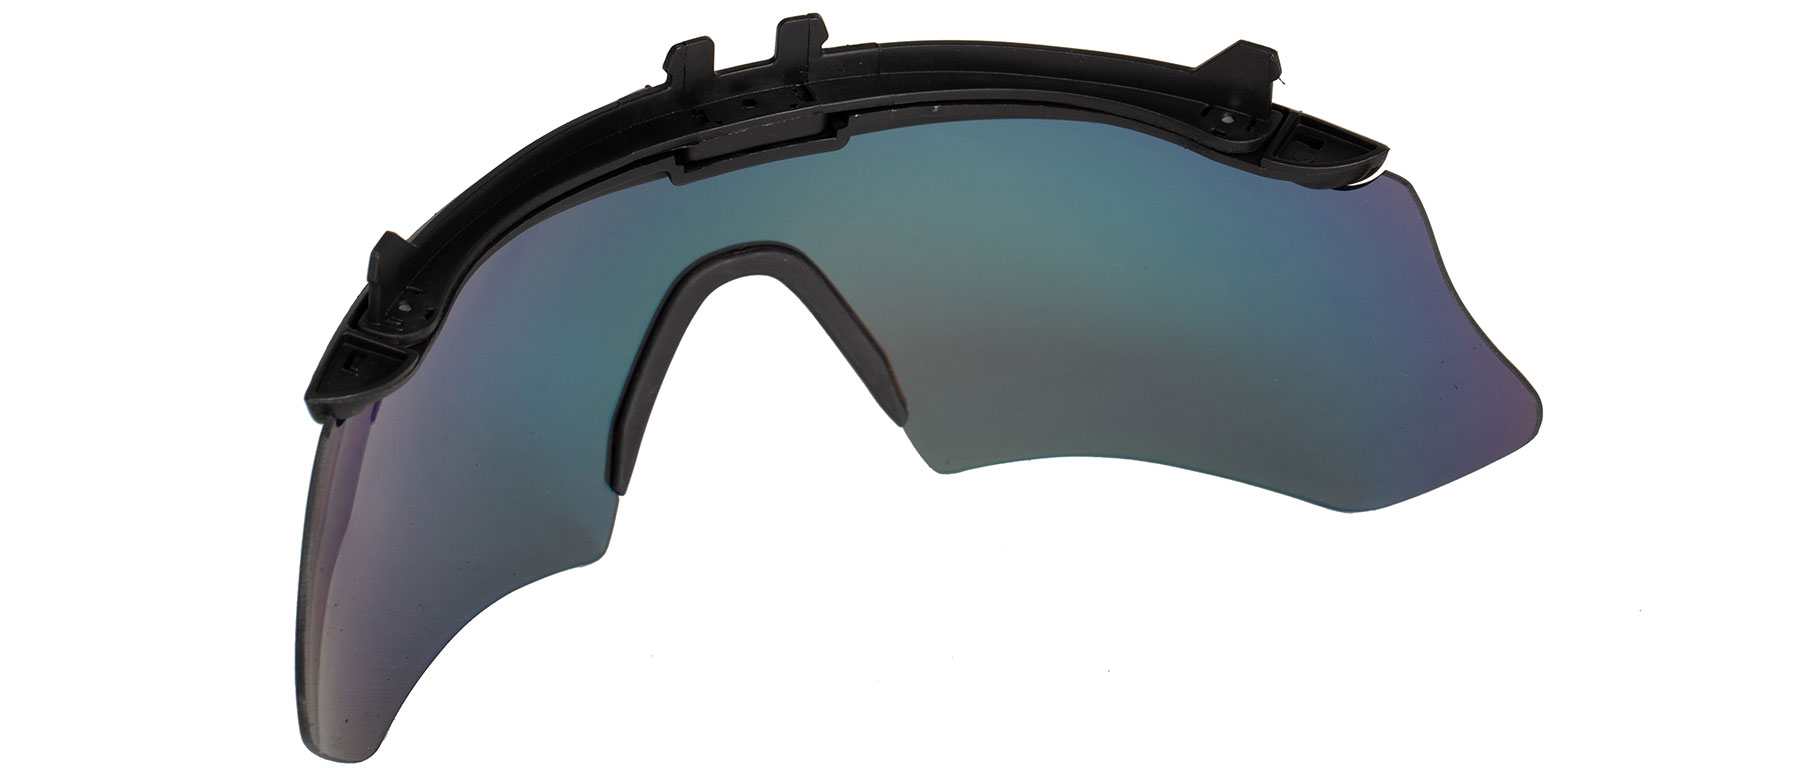 Rudy Project Volantis Removable Optical Shield